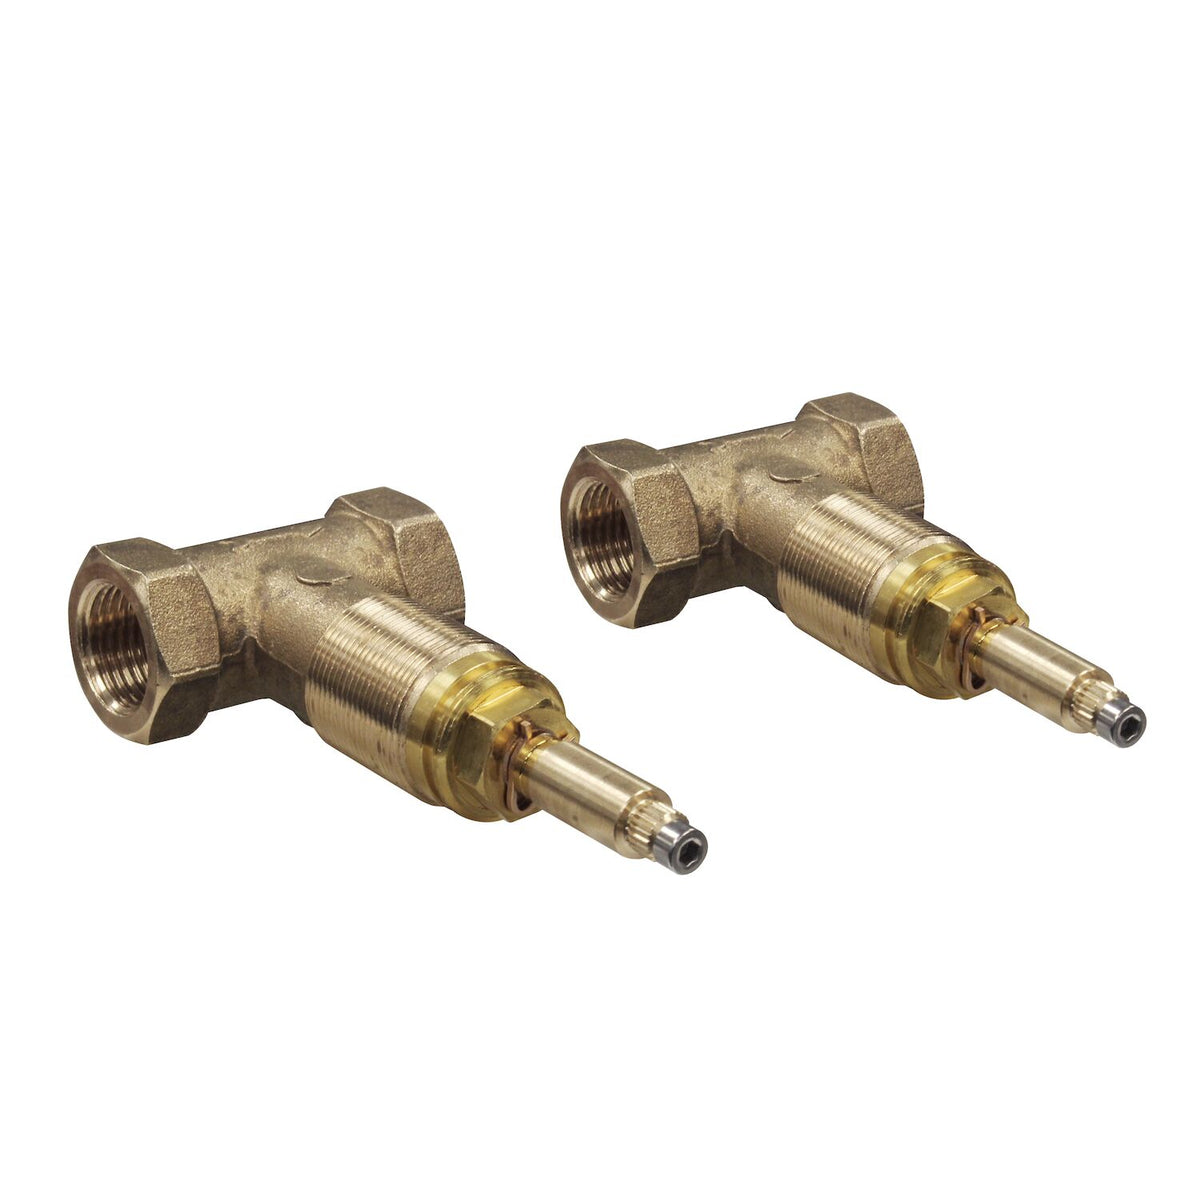 ROHL® 1/2" VALVES ROUGH-IN FOR WALL MOUNT CROSS SET